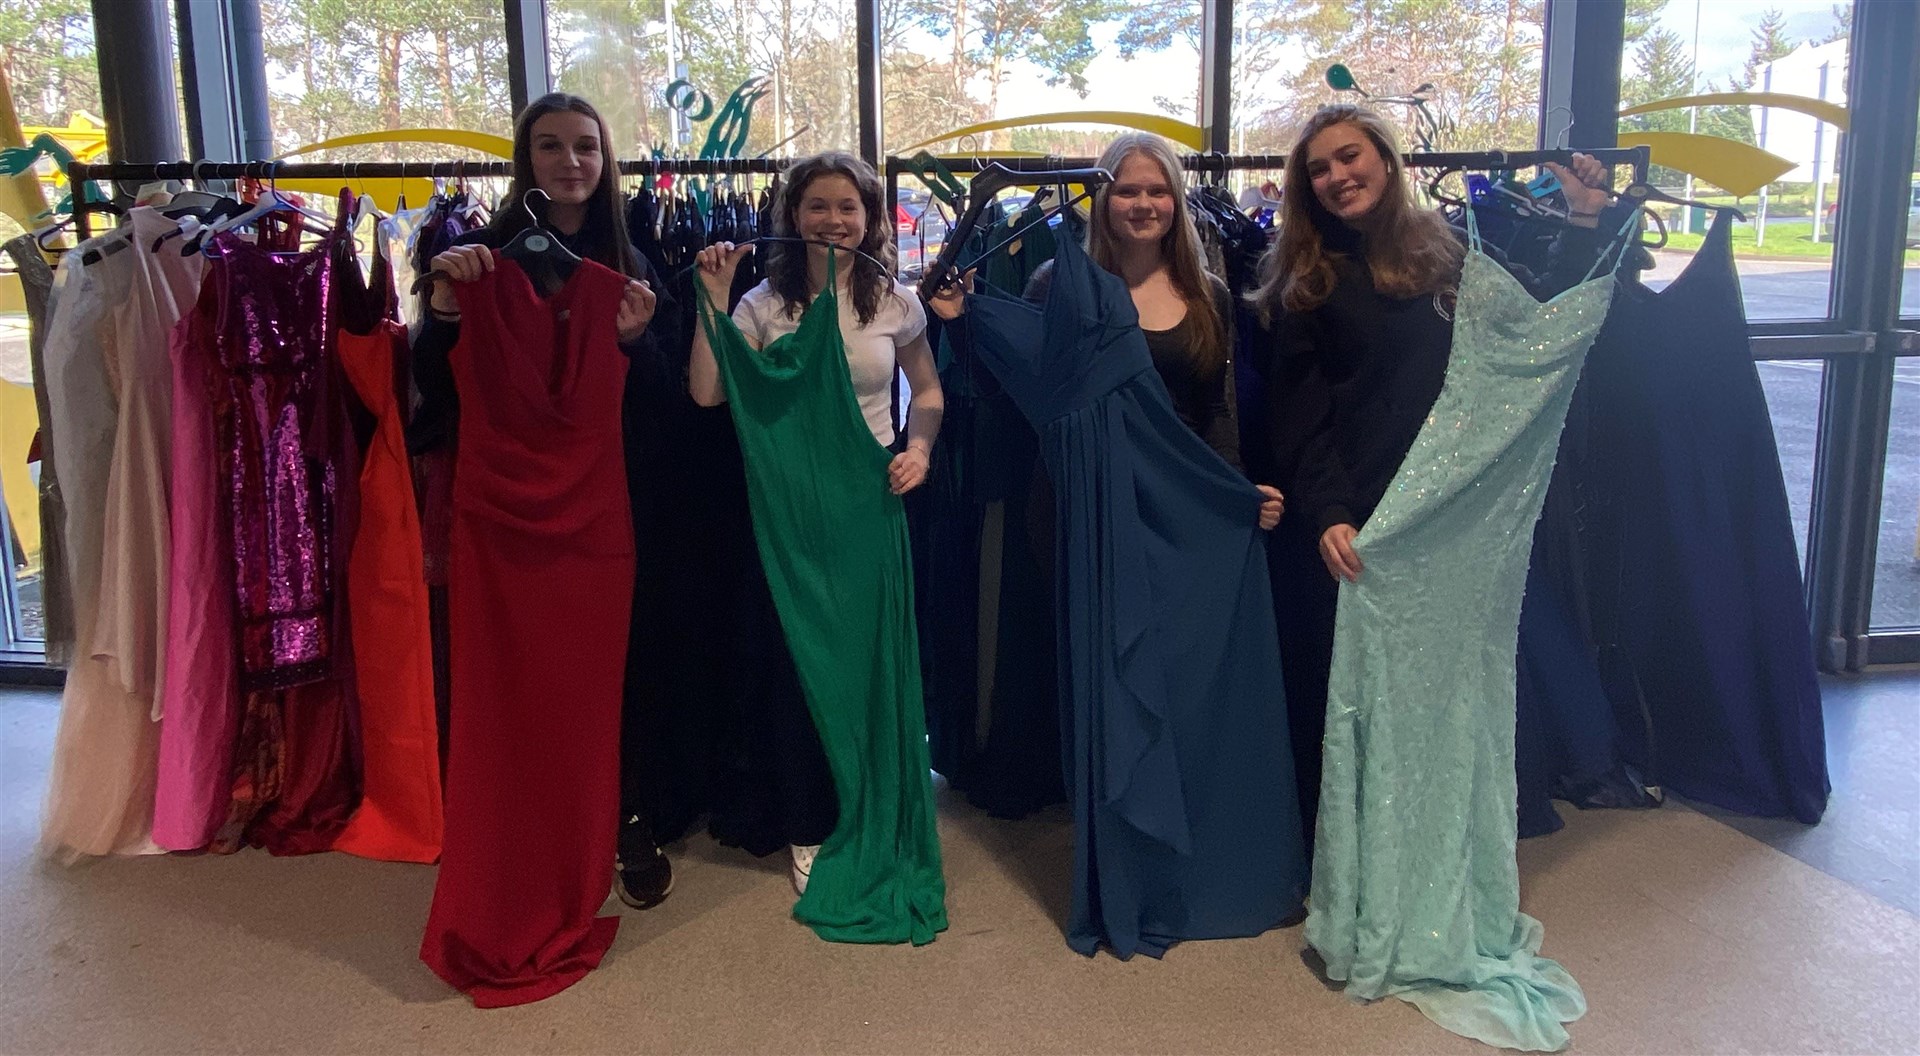 Priscilla Macdonald, Anna Hutt, Jennifer Wilkinson and Rosie Trussell check out some of the prom dresses at the school.